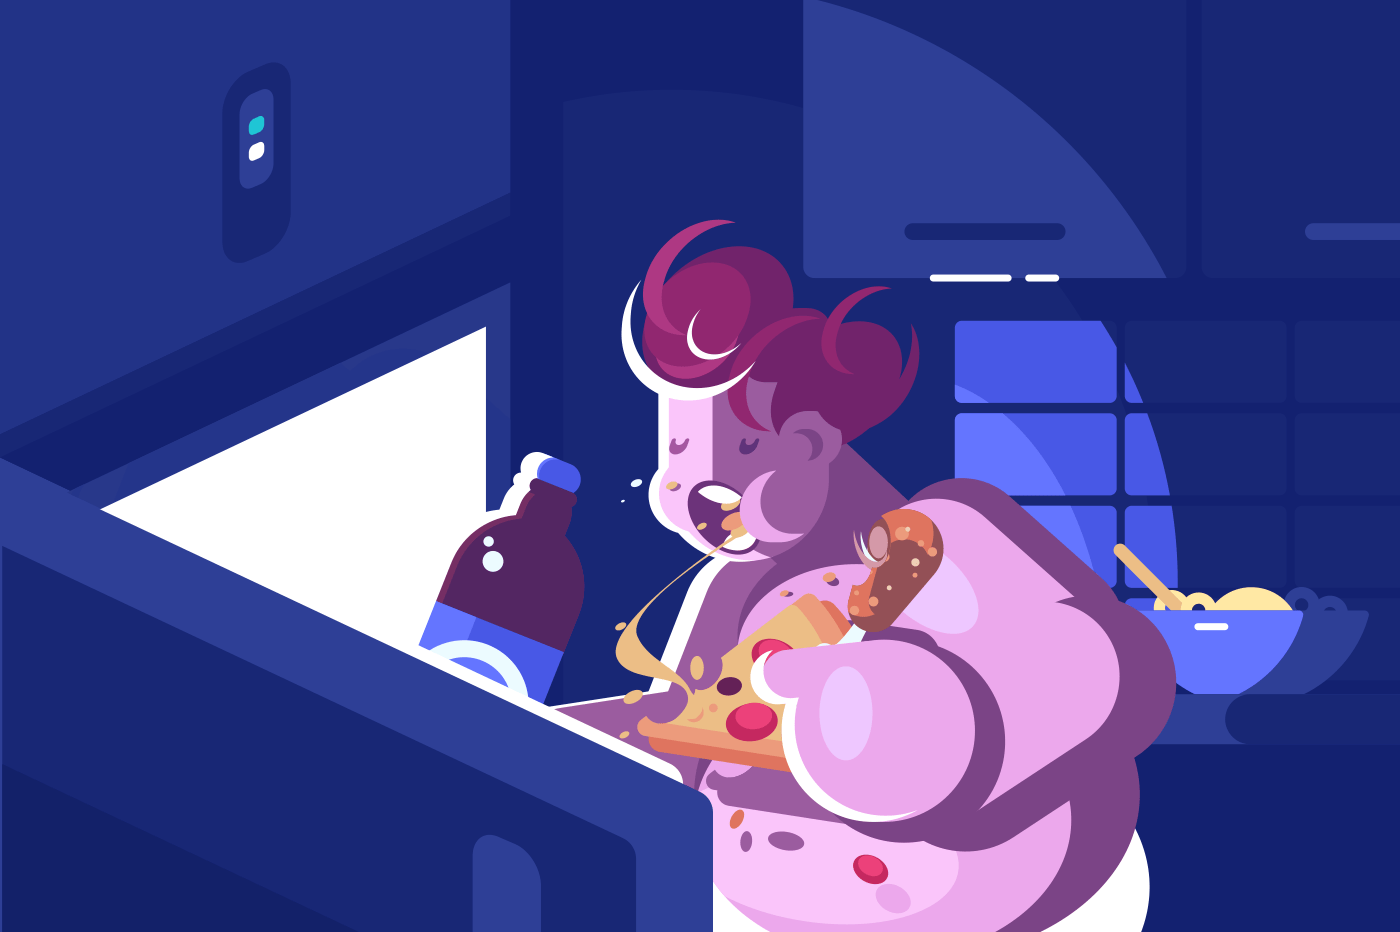 Nightly overeating and gluttony. Girl eating near open refrigerator. Vector illustration